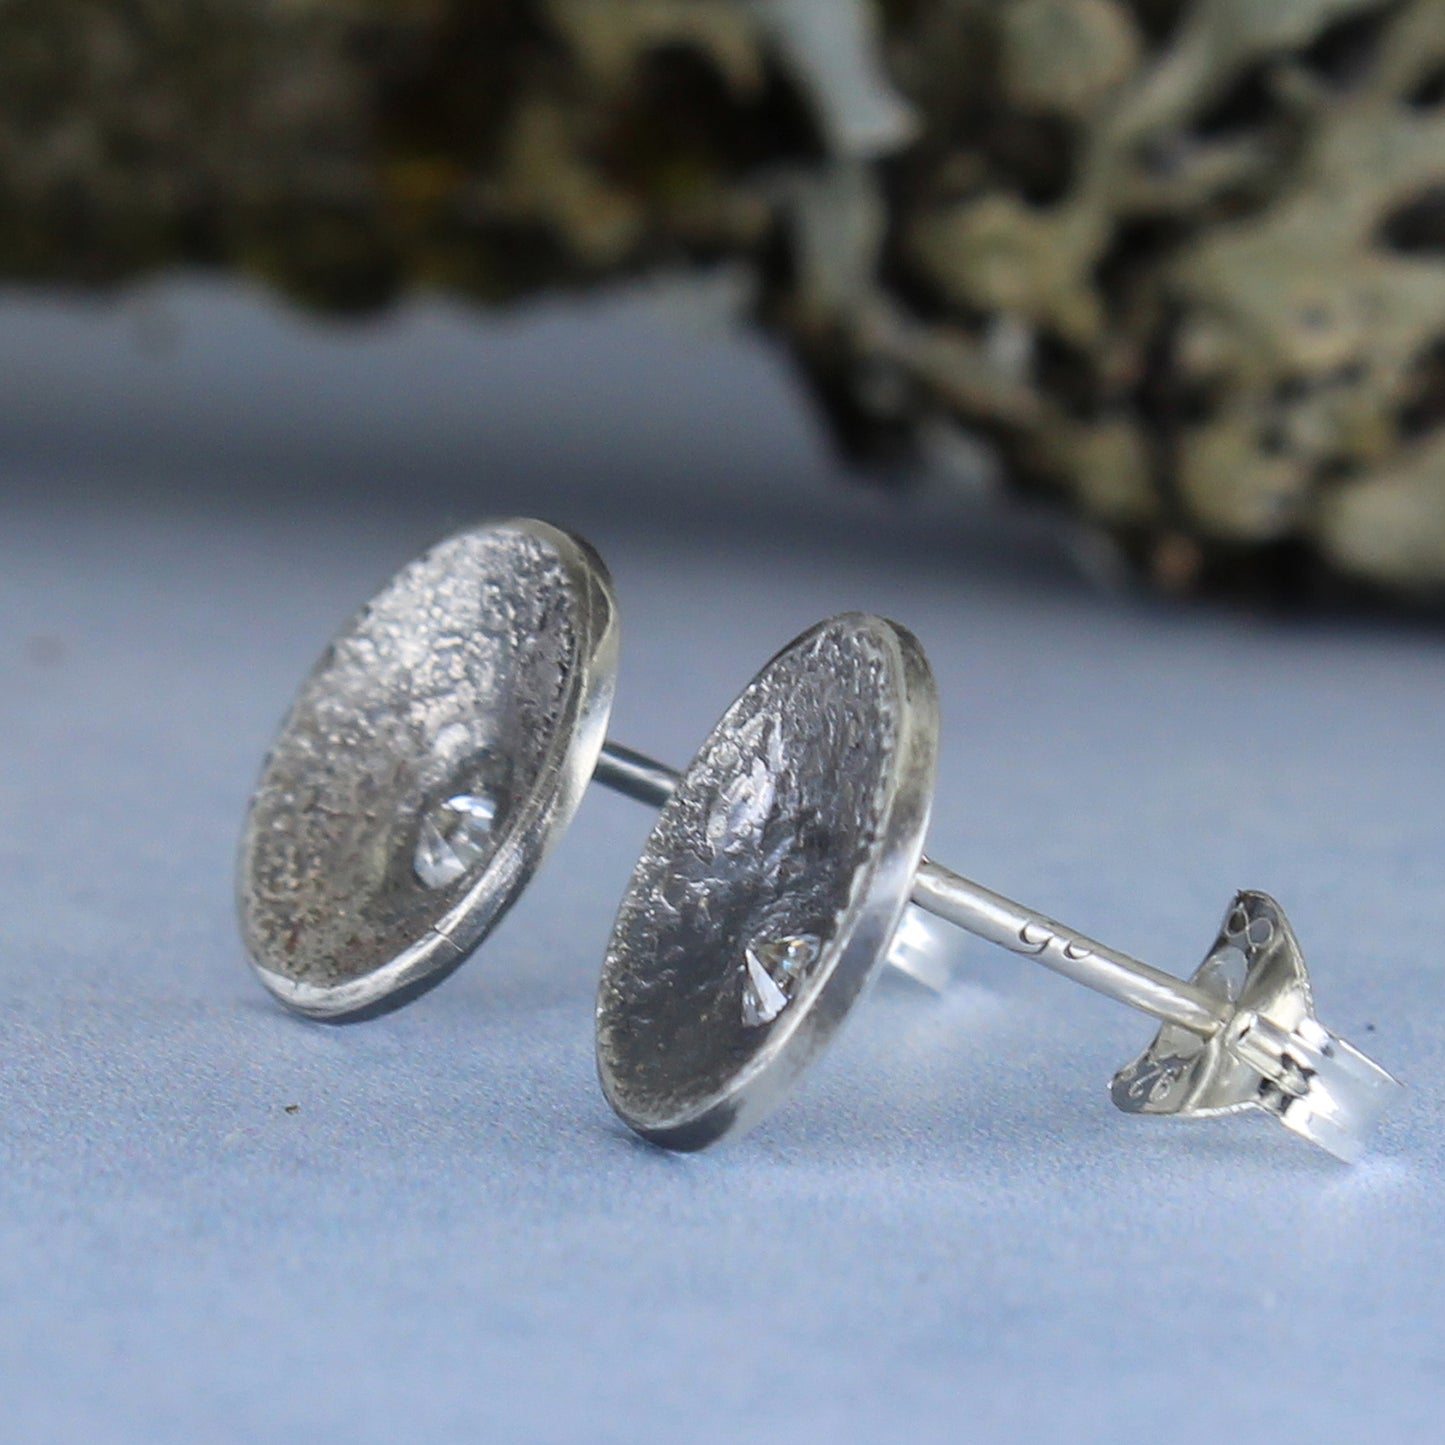 Silver earrings shown from the side